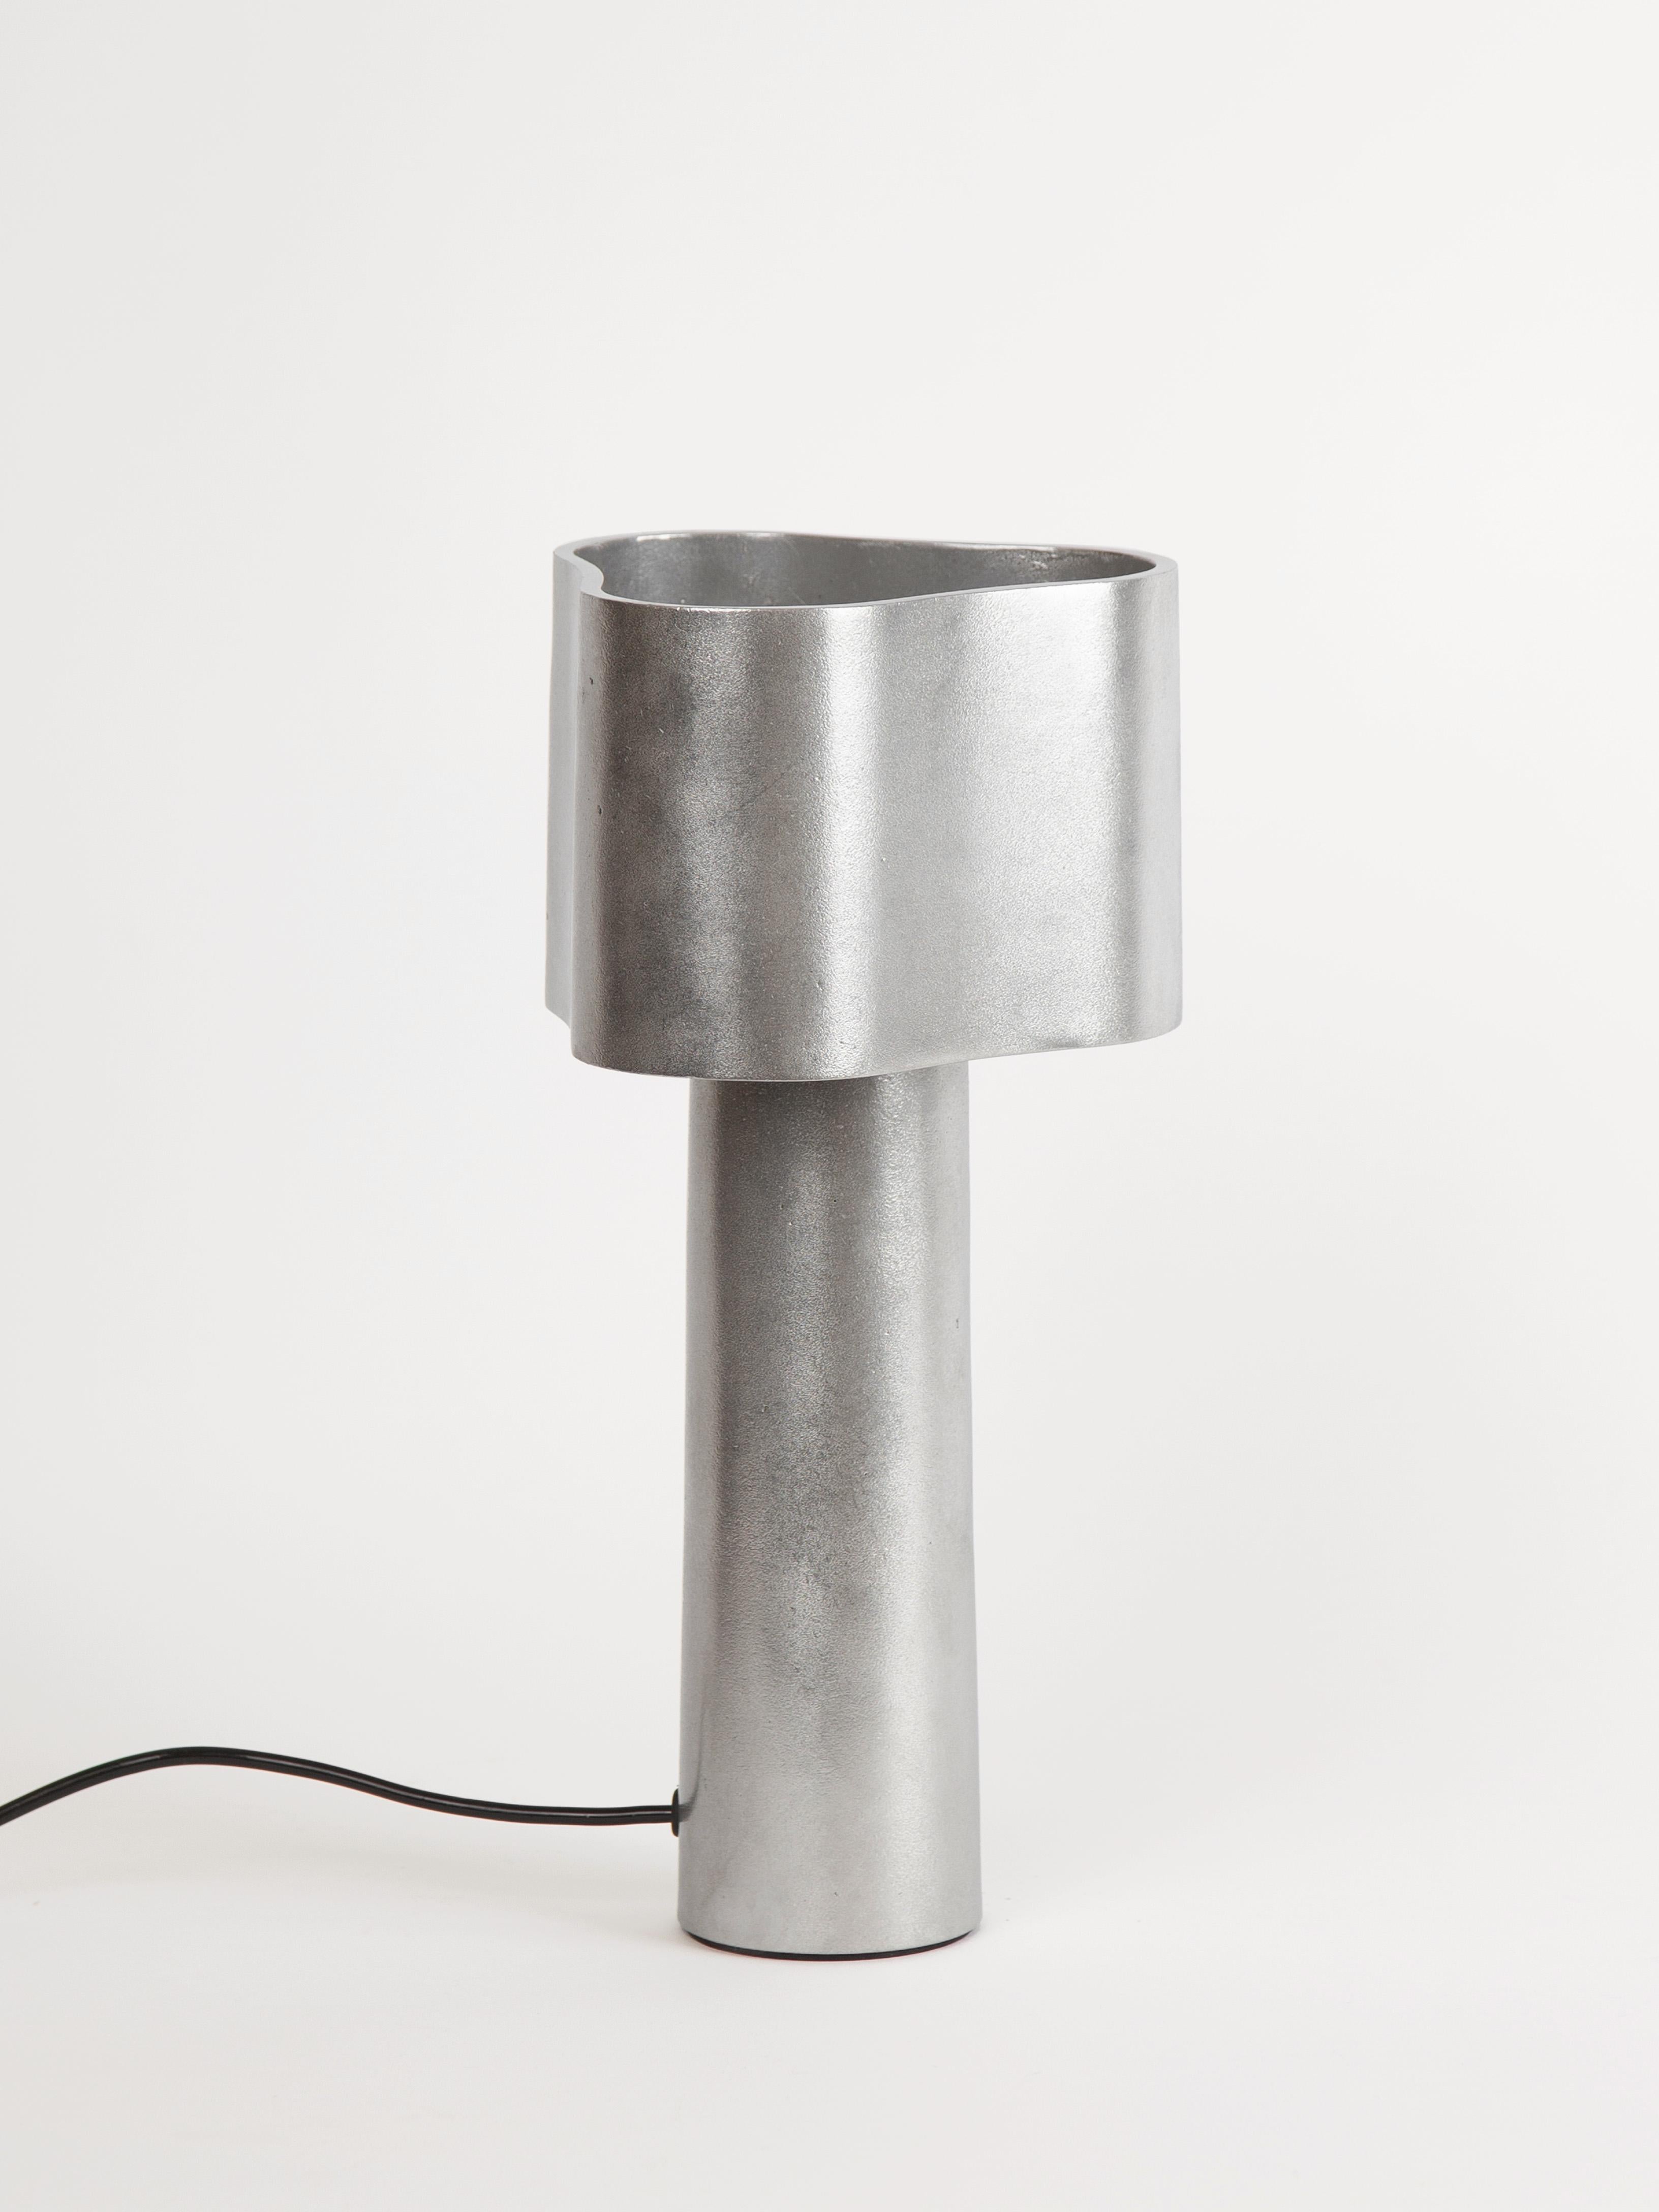 Coy Table Lamp by Stem Design
Dimensions: Ø 19 x H 36 cm. Body Height: 24 cm.
Materials: Cast aluminum.
Finish: Tumbled and burnished. 
Weight: 3 kg.

Finished and assembled by hand in India.

Coy embraces singularity in design, exploring the